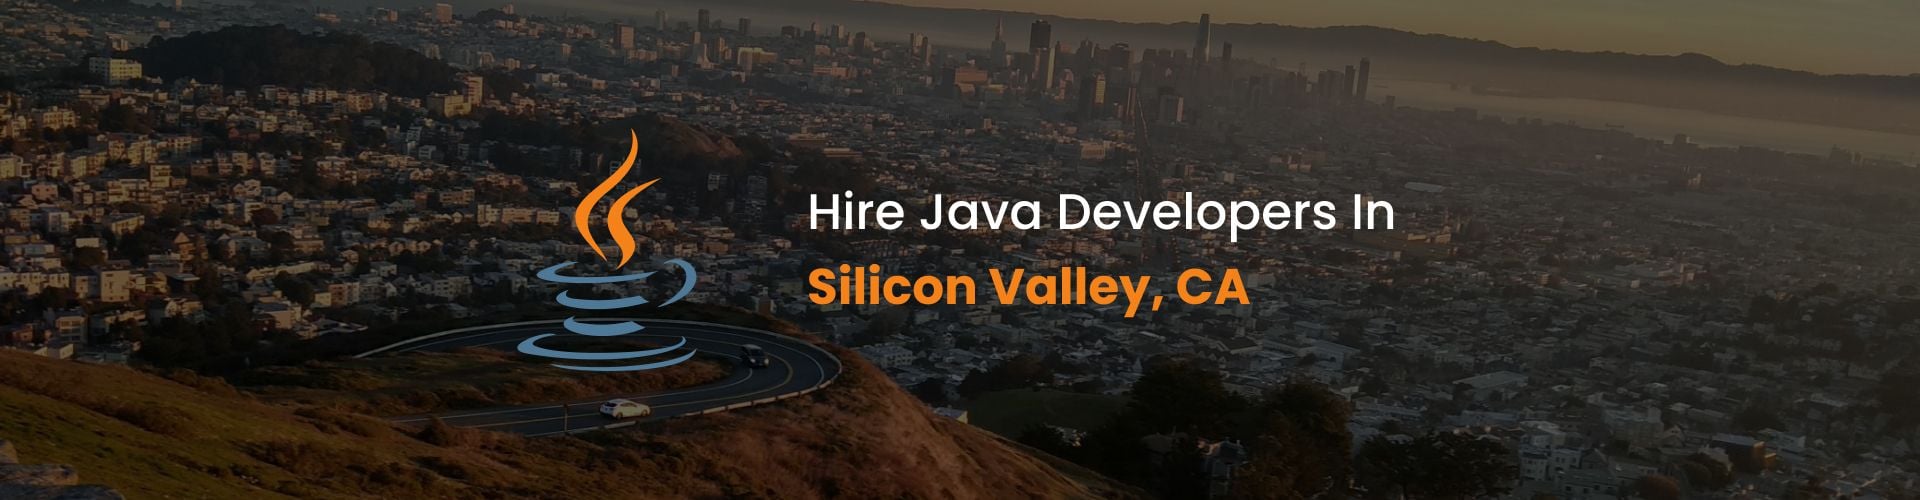 hire java developers in silicon valley, ca